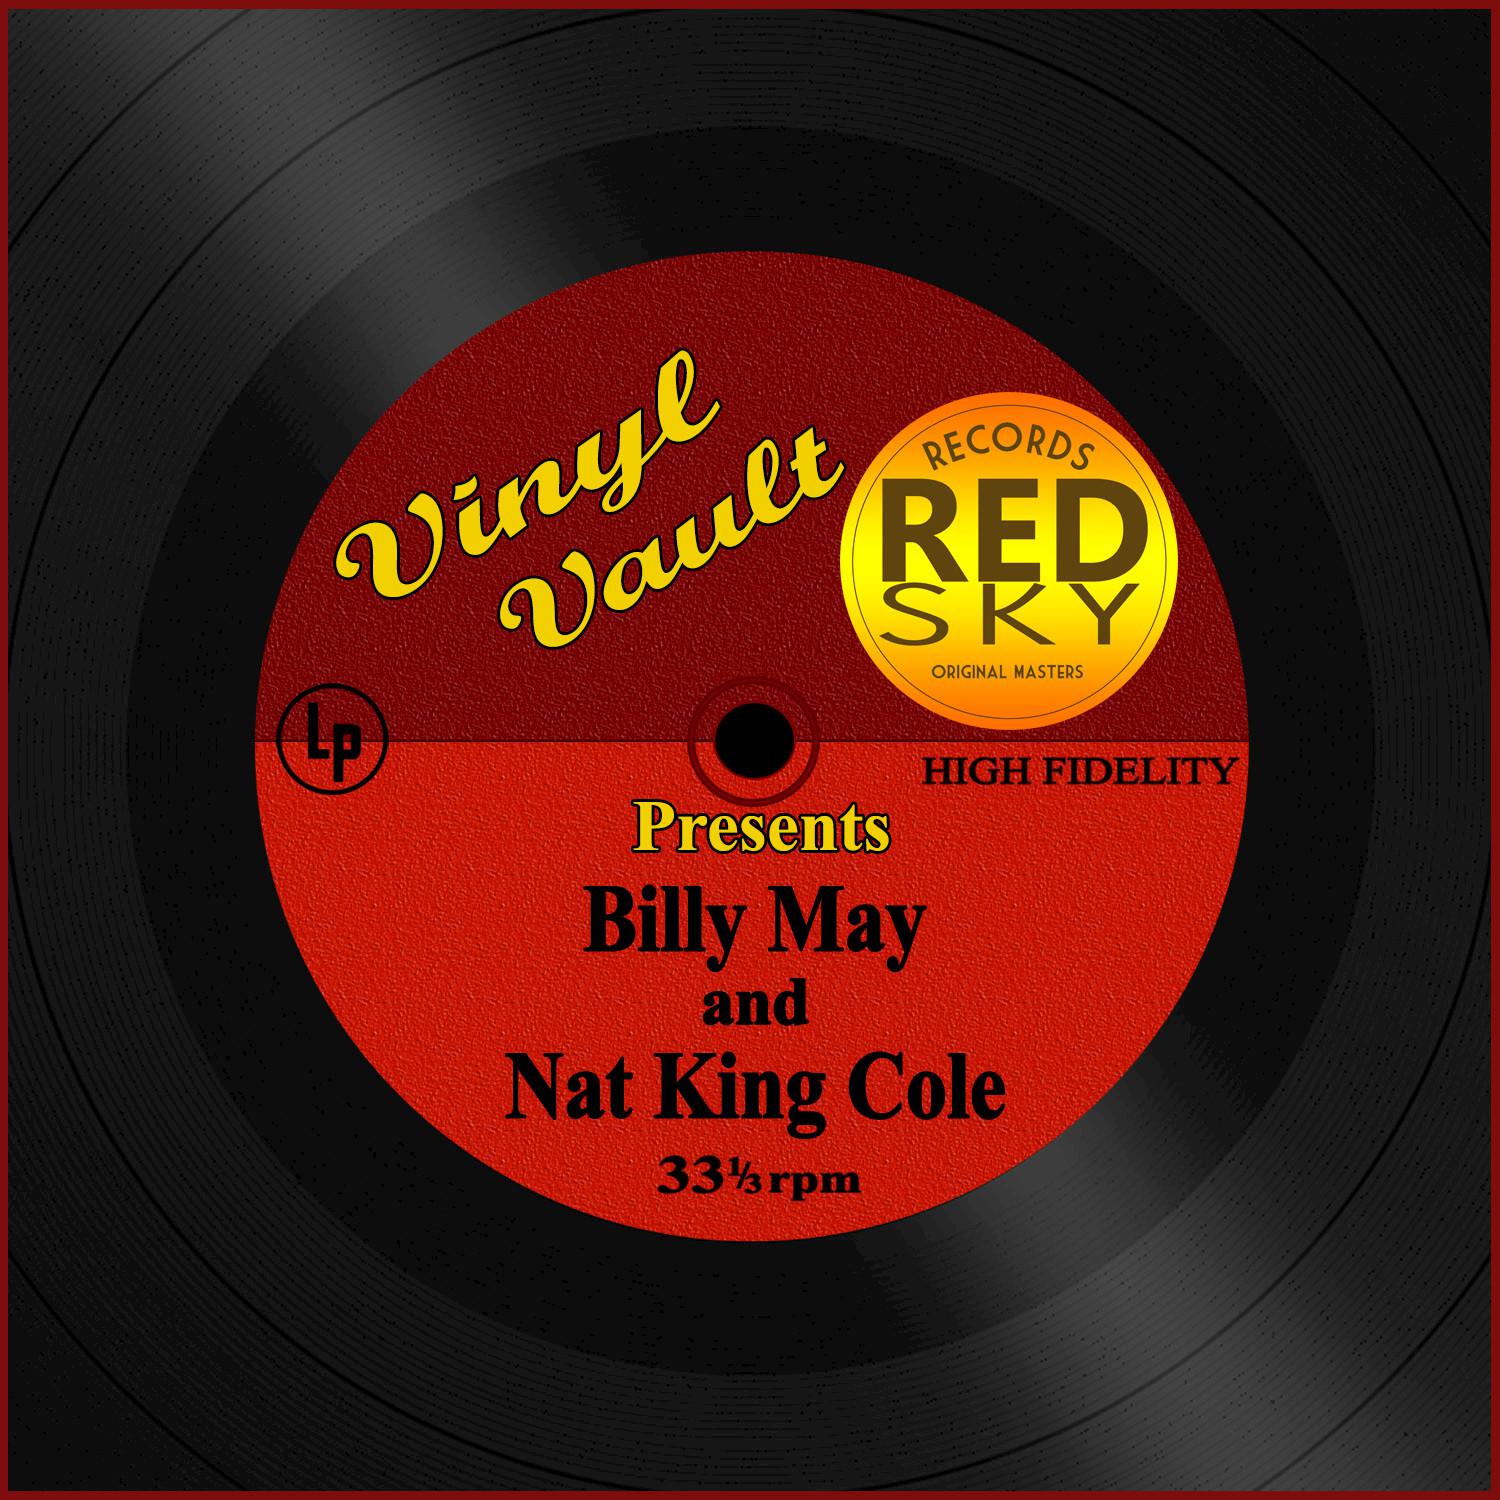 Vinyl Vault Presents Billy May and Nat King Cole